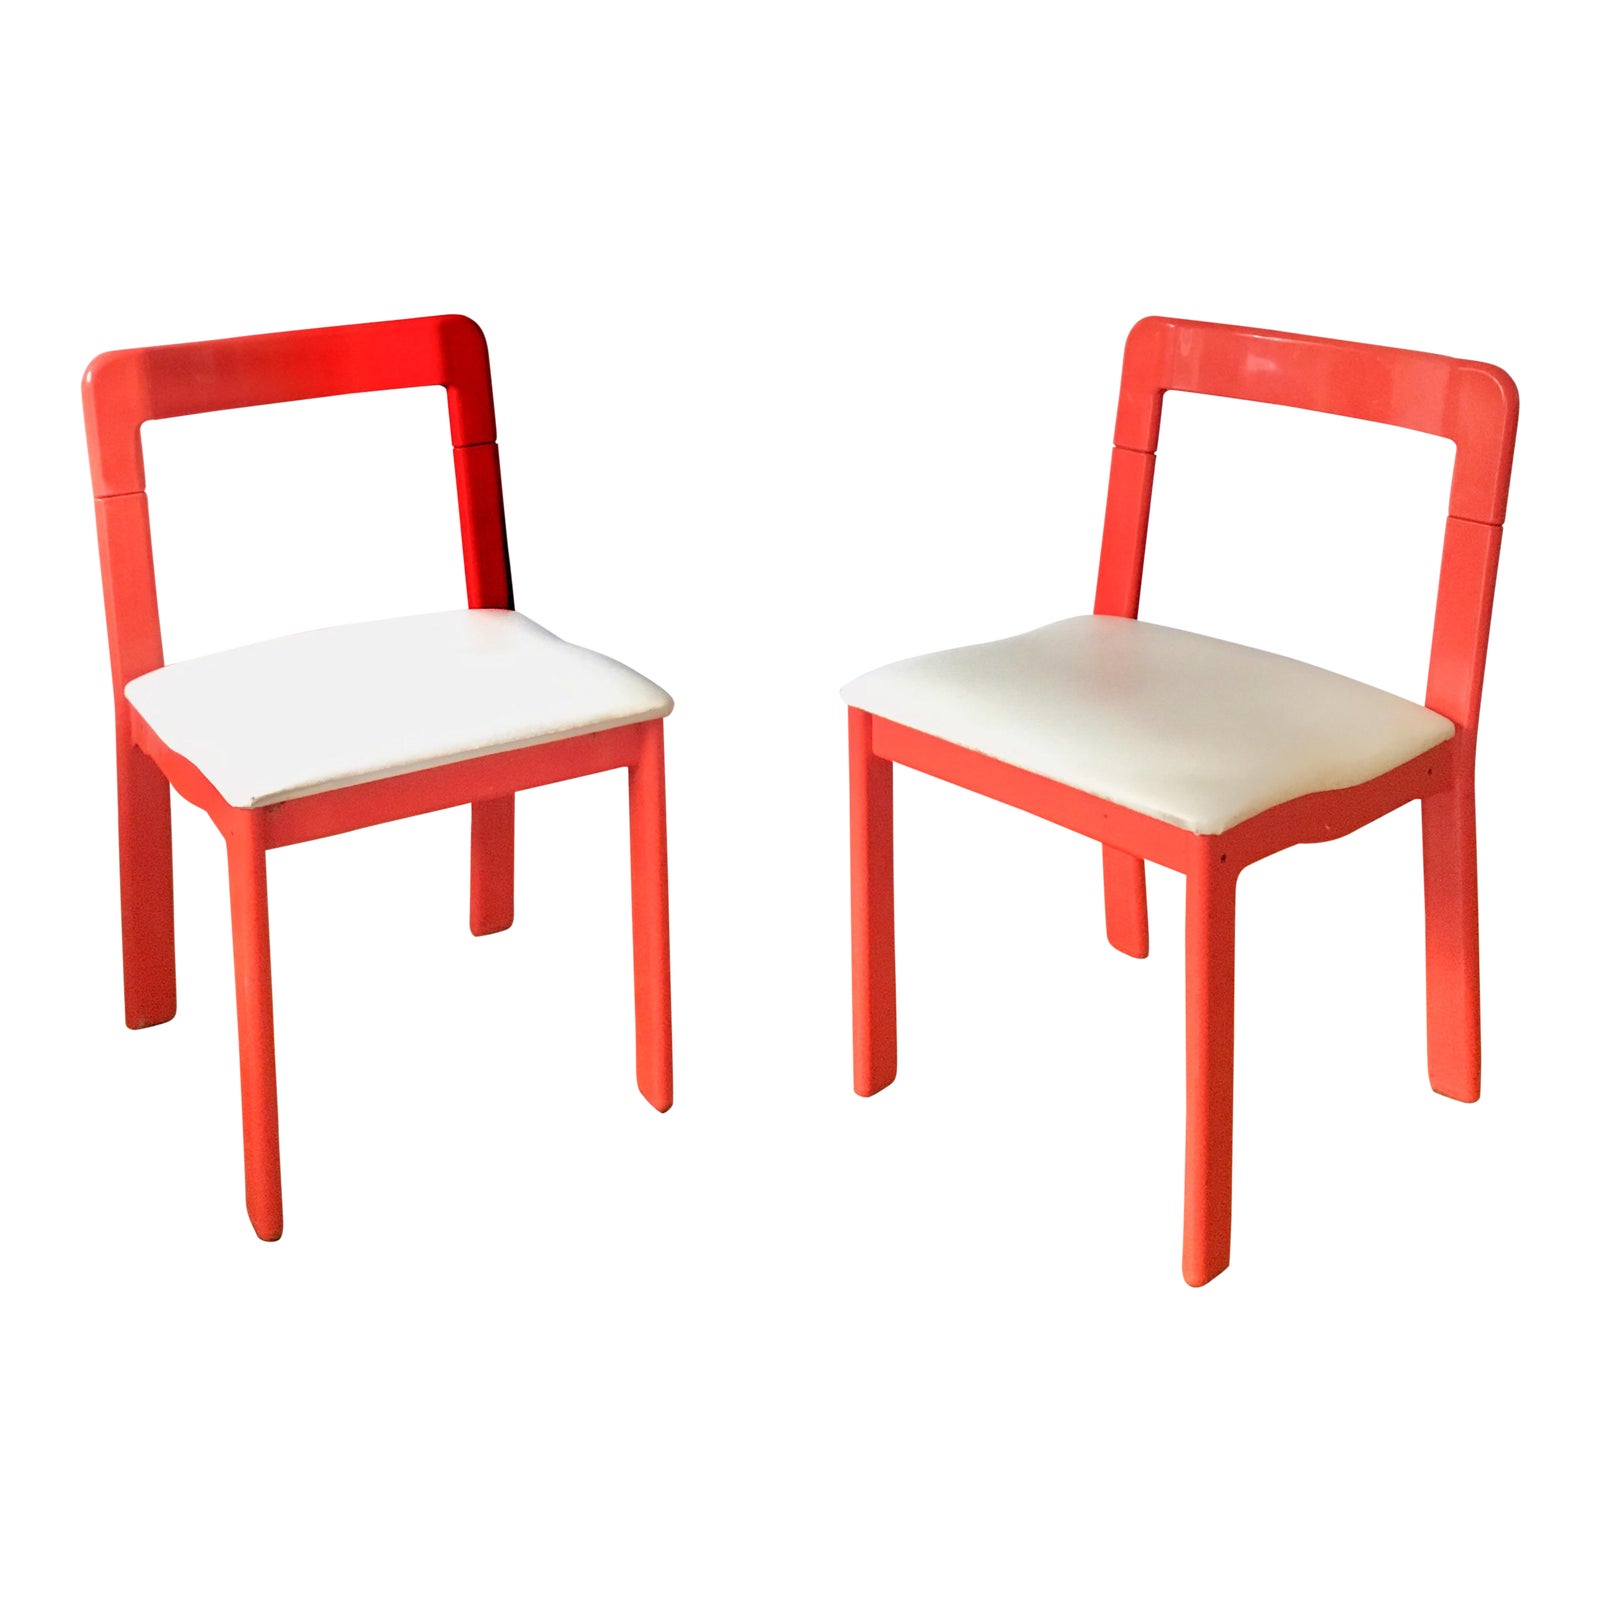 Get a Deal on Two Red Plastic Adirondack Chairs for Your Patio in Calgary